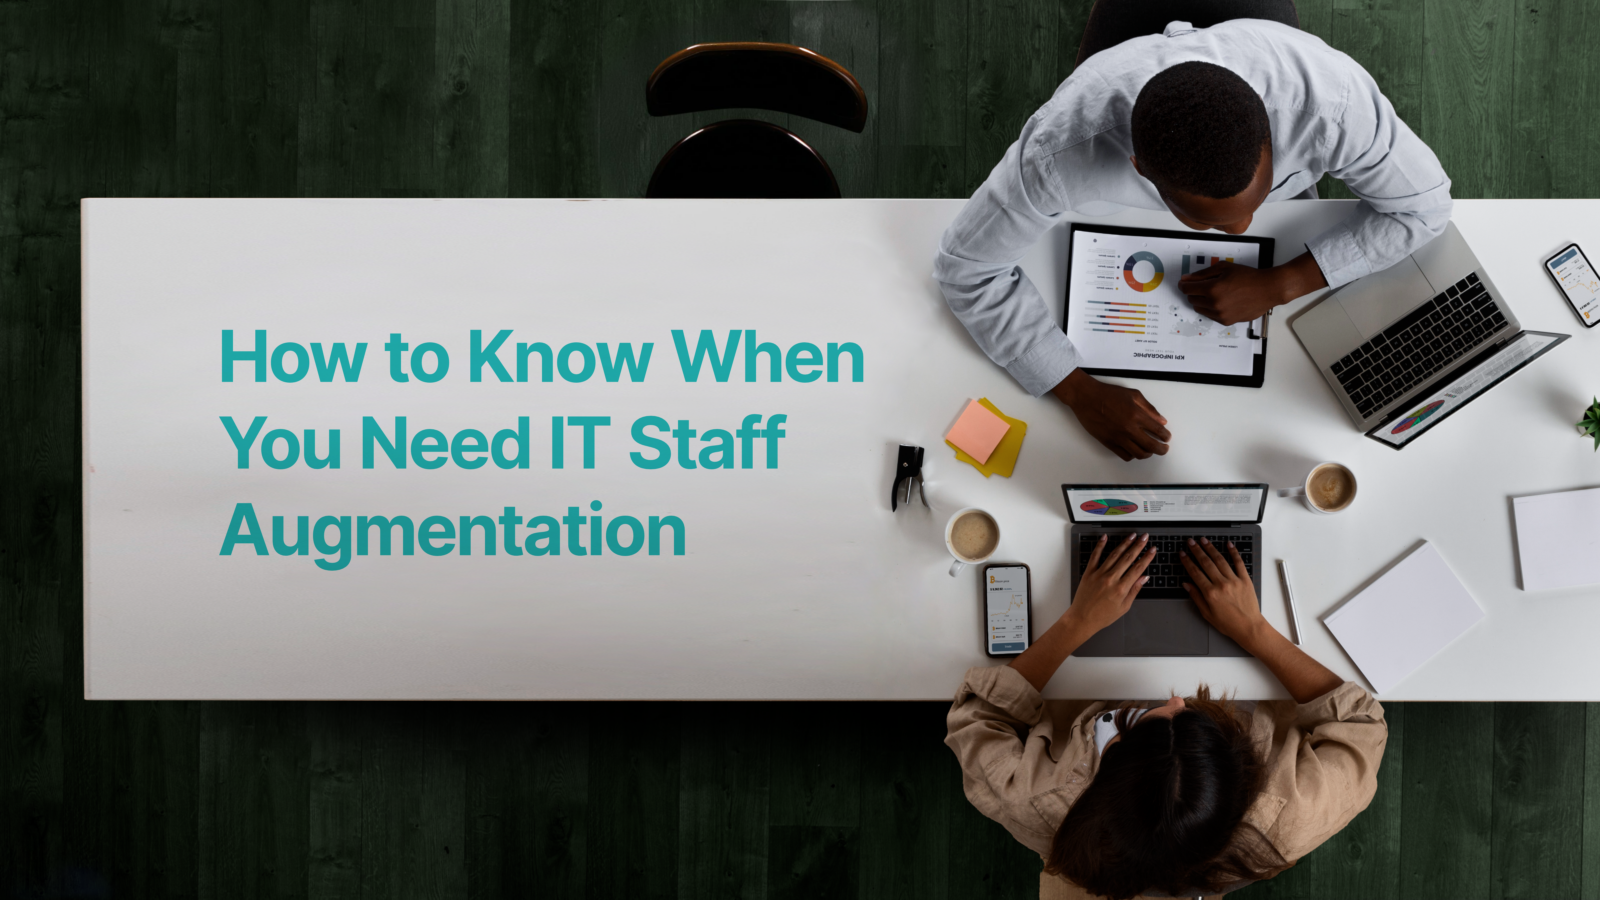 IT staff augmentation provides businesses with access to skilled talent, enhancing IT capabilities and helping achieve IT goals efficiently with Belatrix.